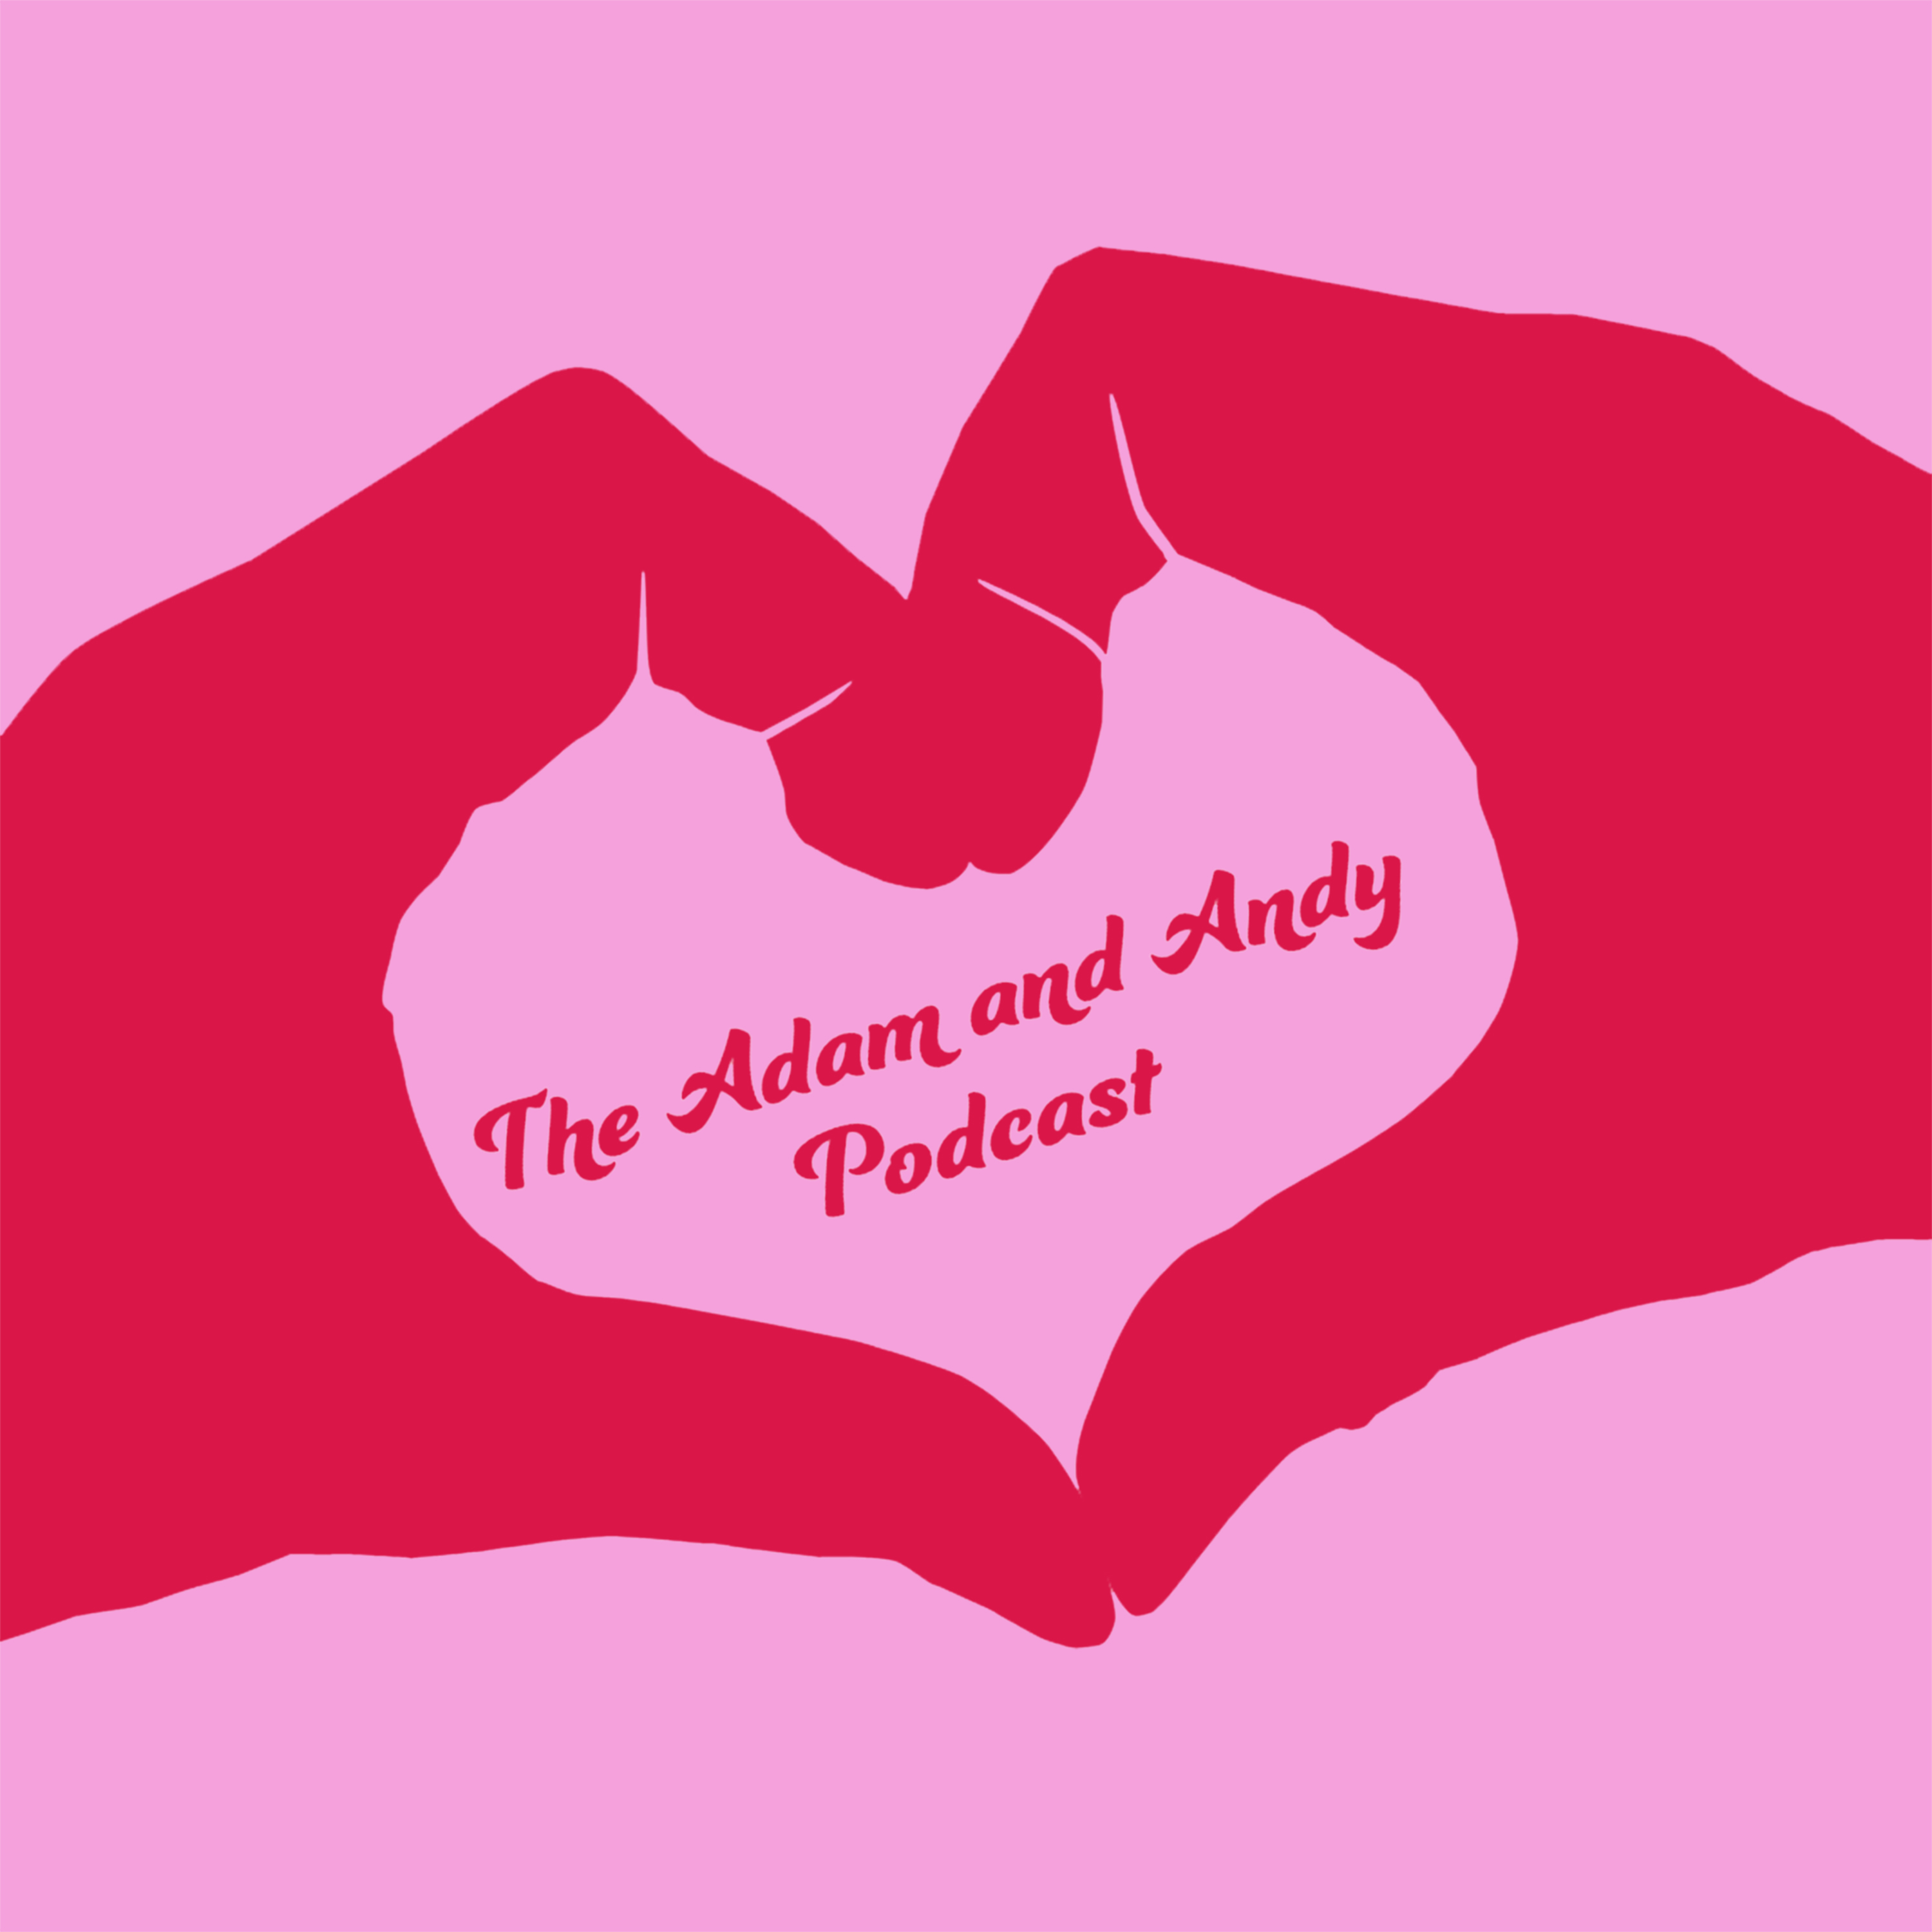 The Adam and Andy Podcast